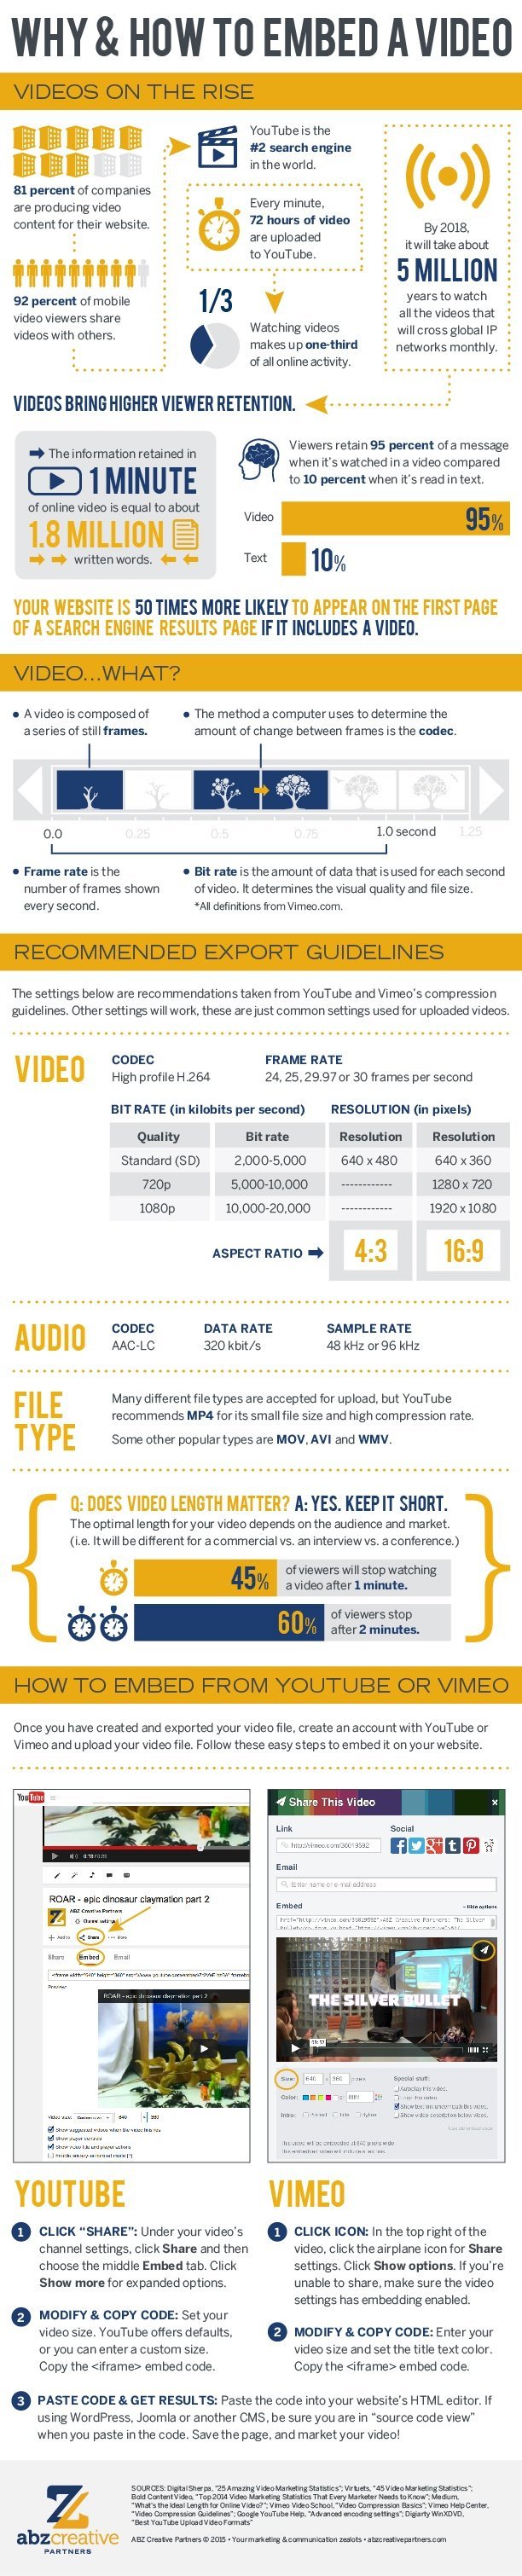 How to embed YouTube video in HTML [infographic]